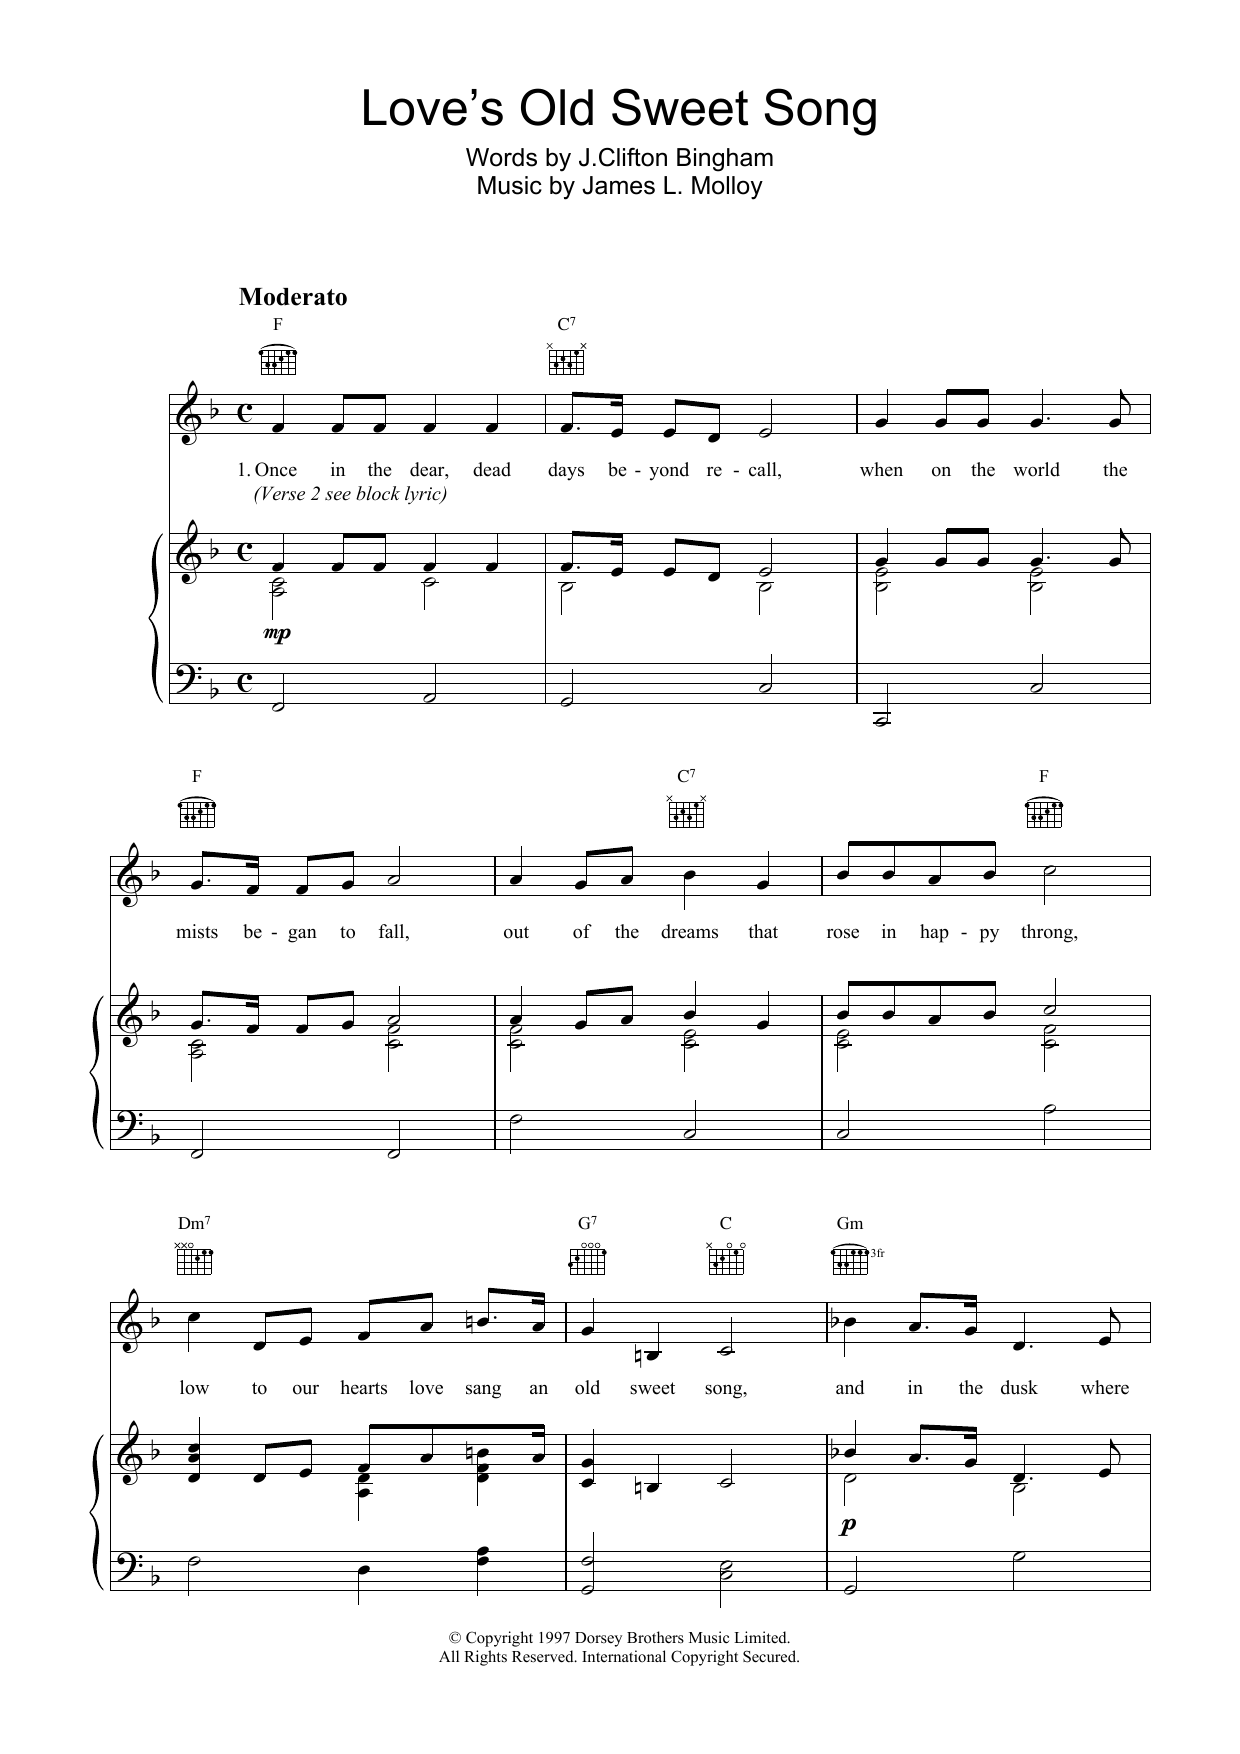 James Molloy Love's Old Sweet Song sheet music notes and chords. Download Printable PDF.